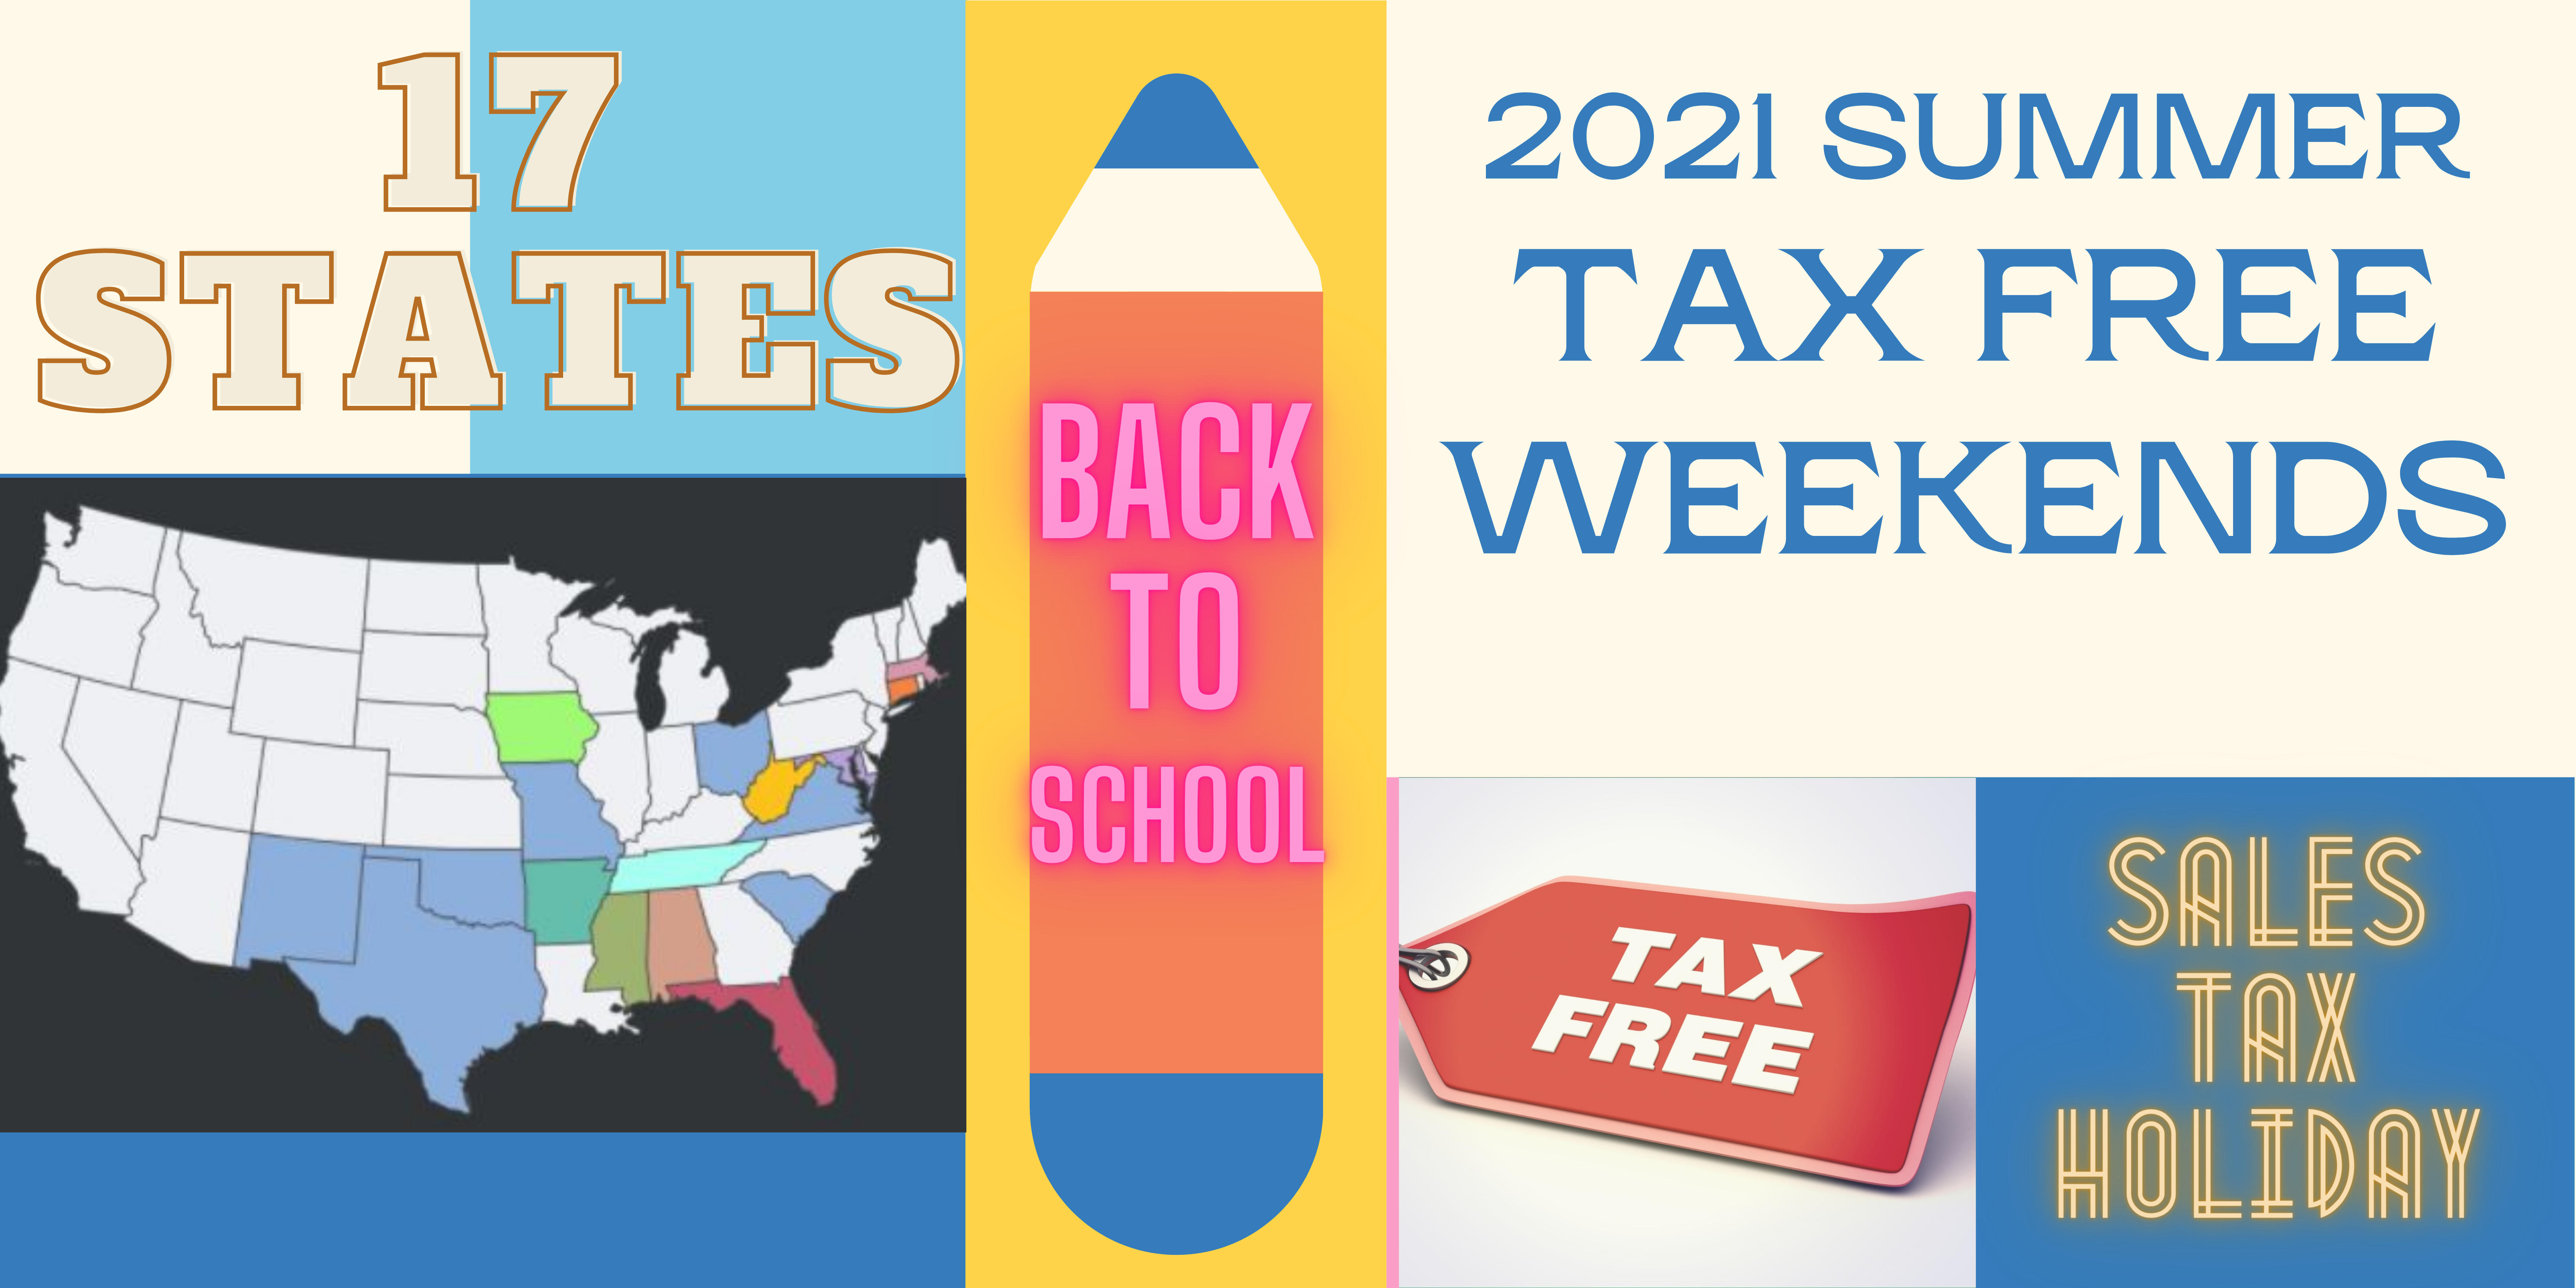 Upcoming 2021 Summer Tax Free Weekends